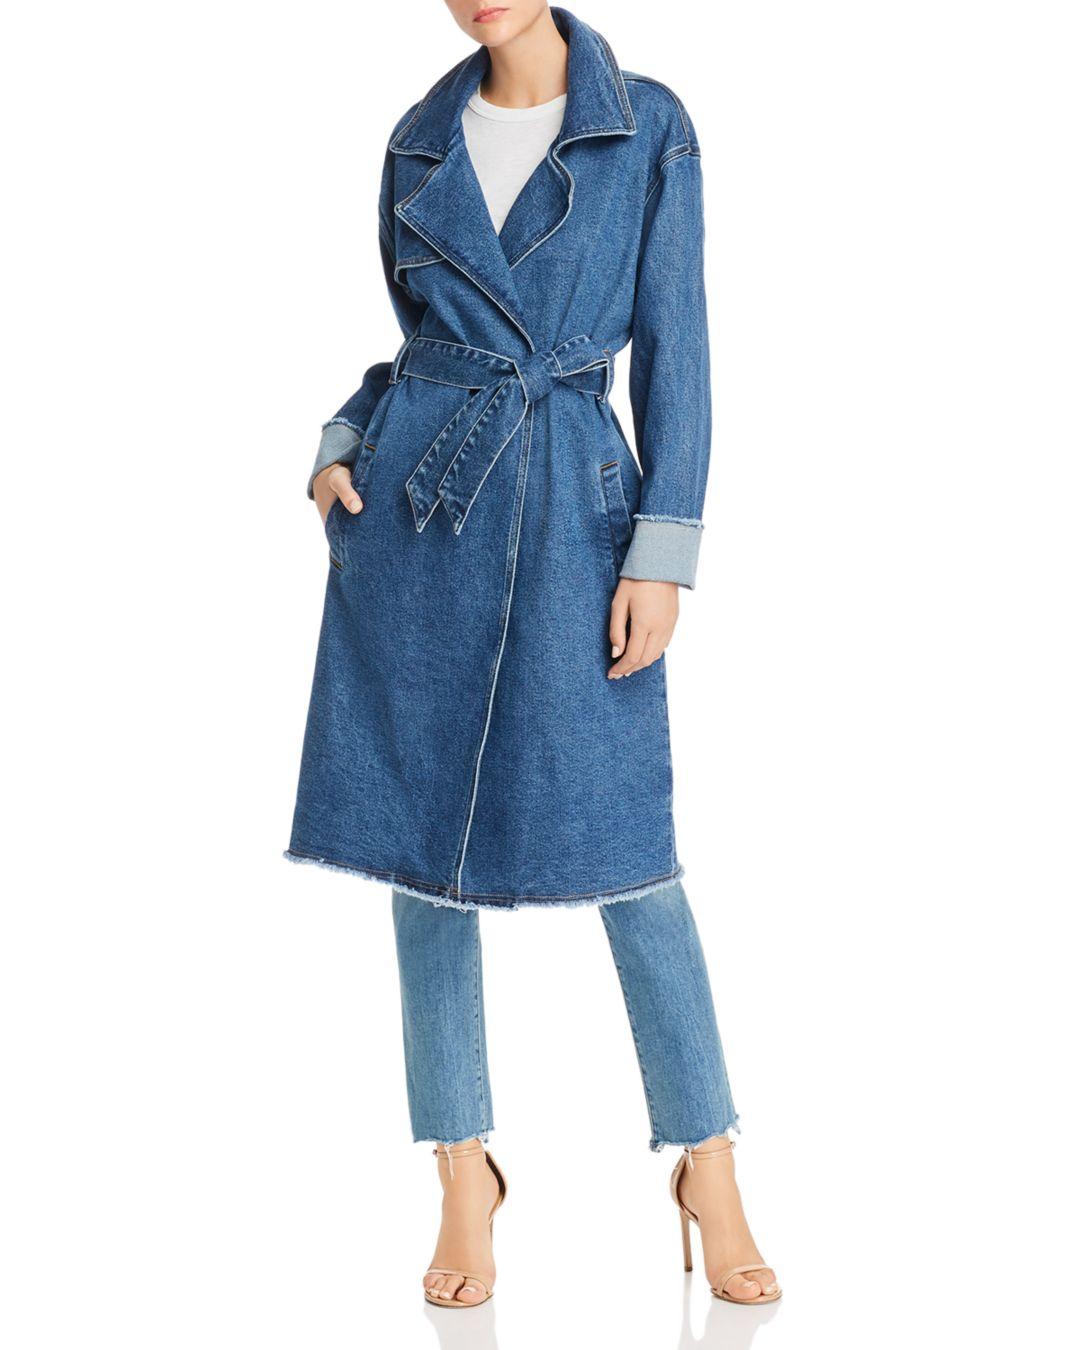 Guess Denim Trench Coat in Blue - Lyst